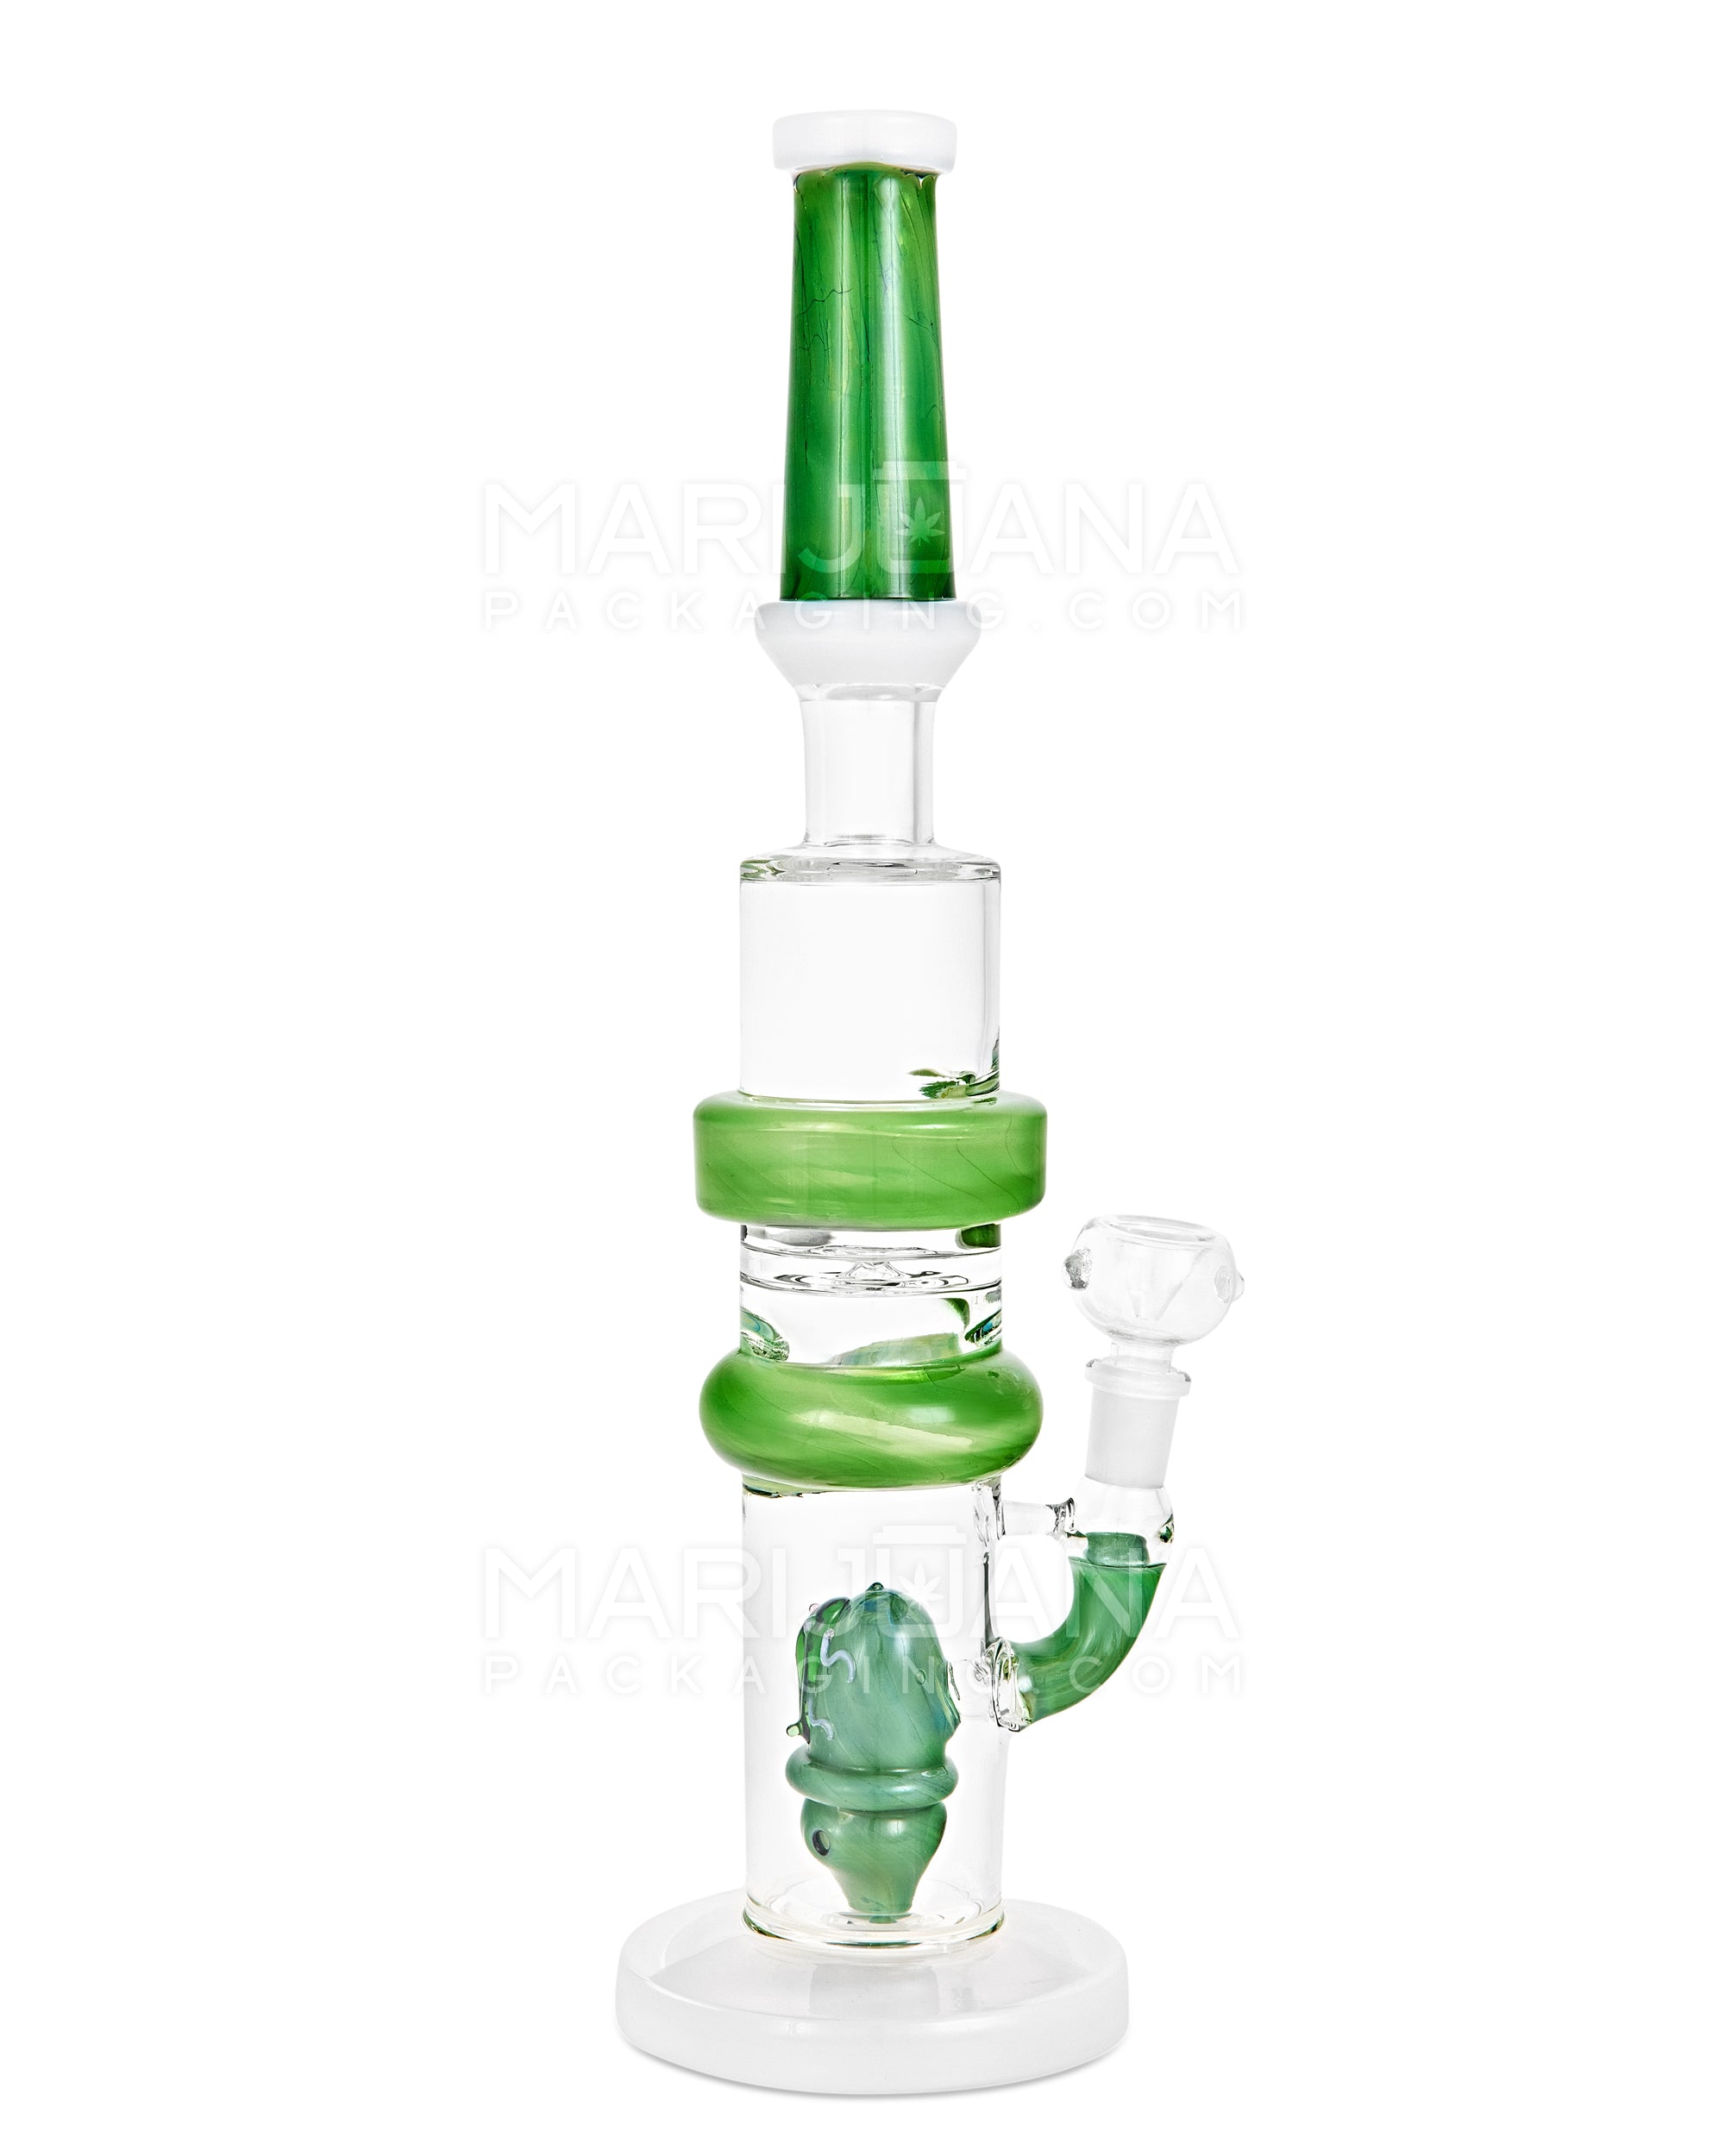 Straight Neck Frog Barrel Perc Glass Water Pipe w/ Ice Catcher | 14.5in Tall - 14mm Bowl - Green - 1